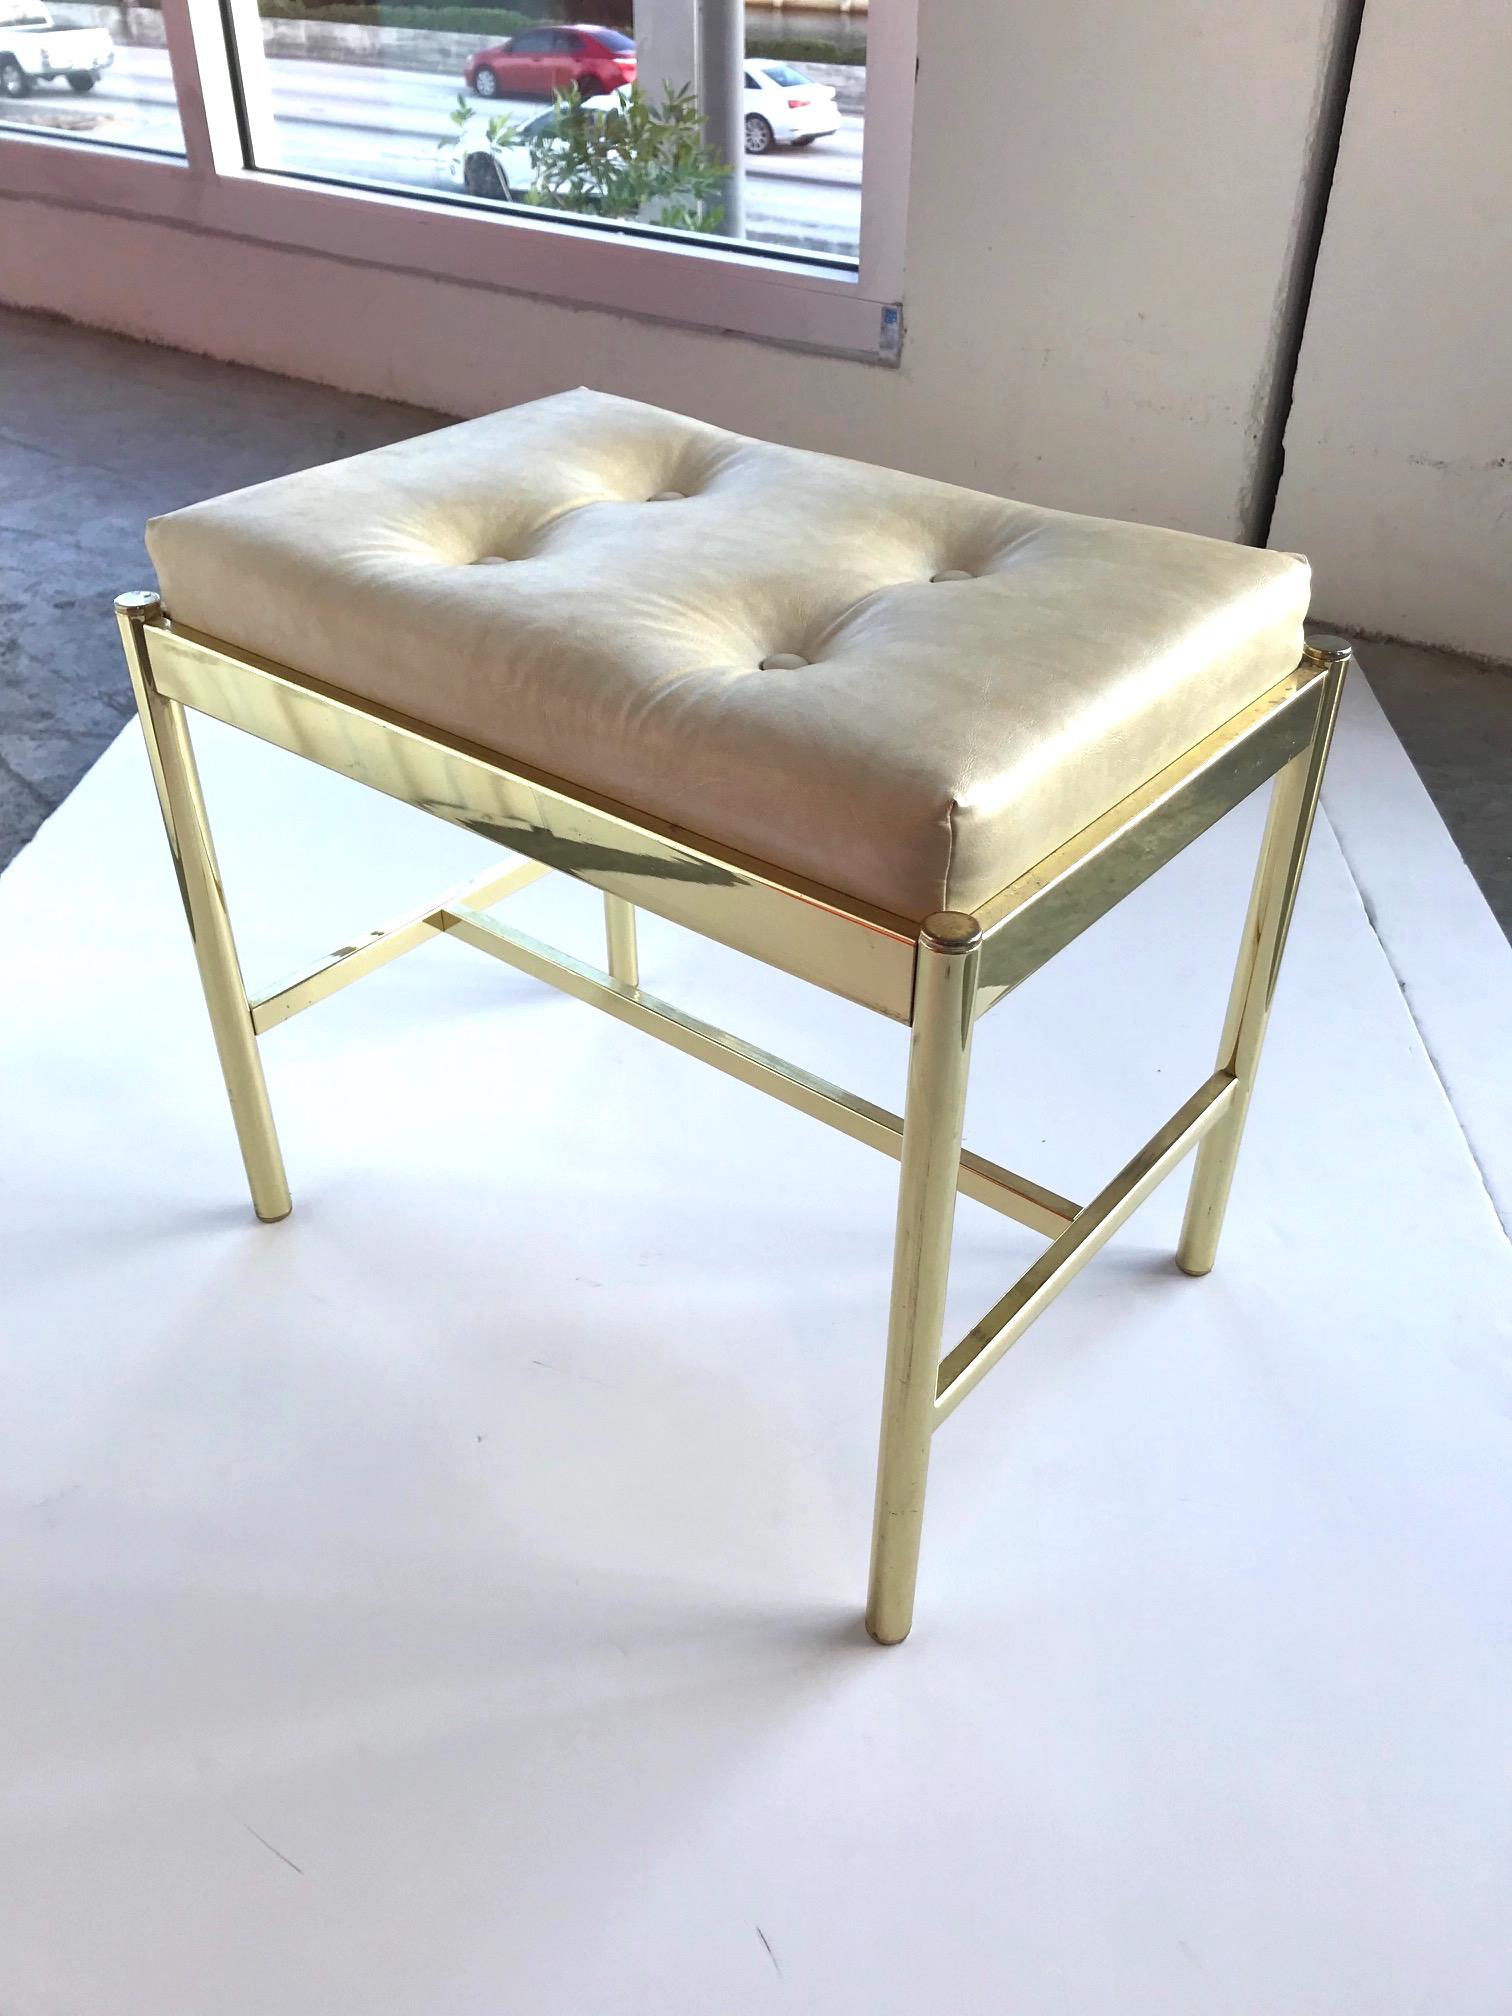 Chic Mid-Century Modern vanity bench or vanity stool with brass frame, in easy to clean Naugahyde leather in hues of tan, or beige. Bench has a rectangular form and features streamline crossbar base and button details on the seat.